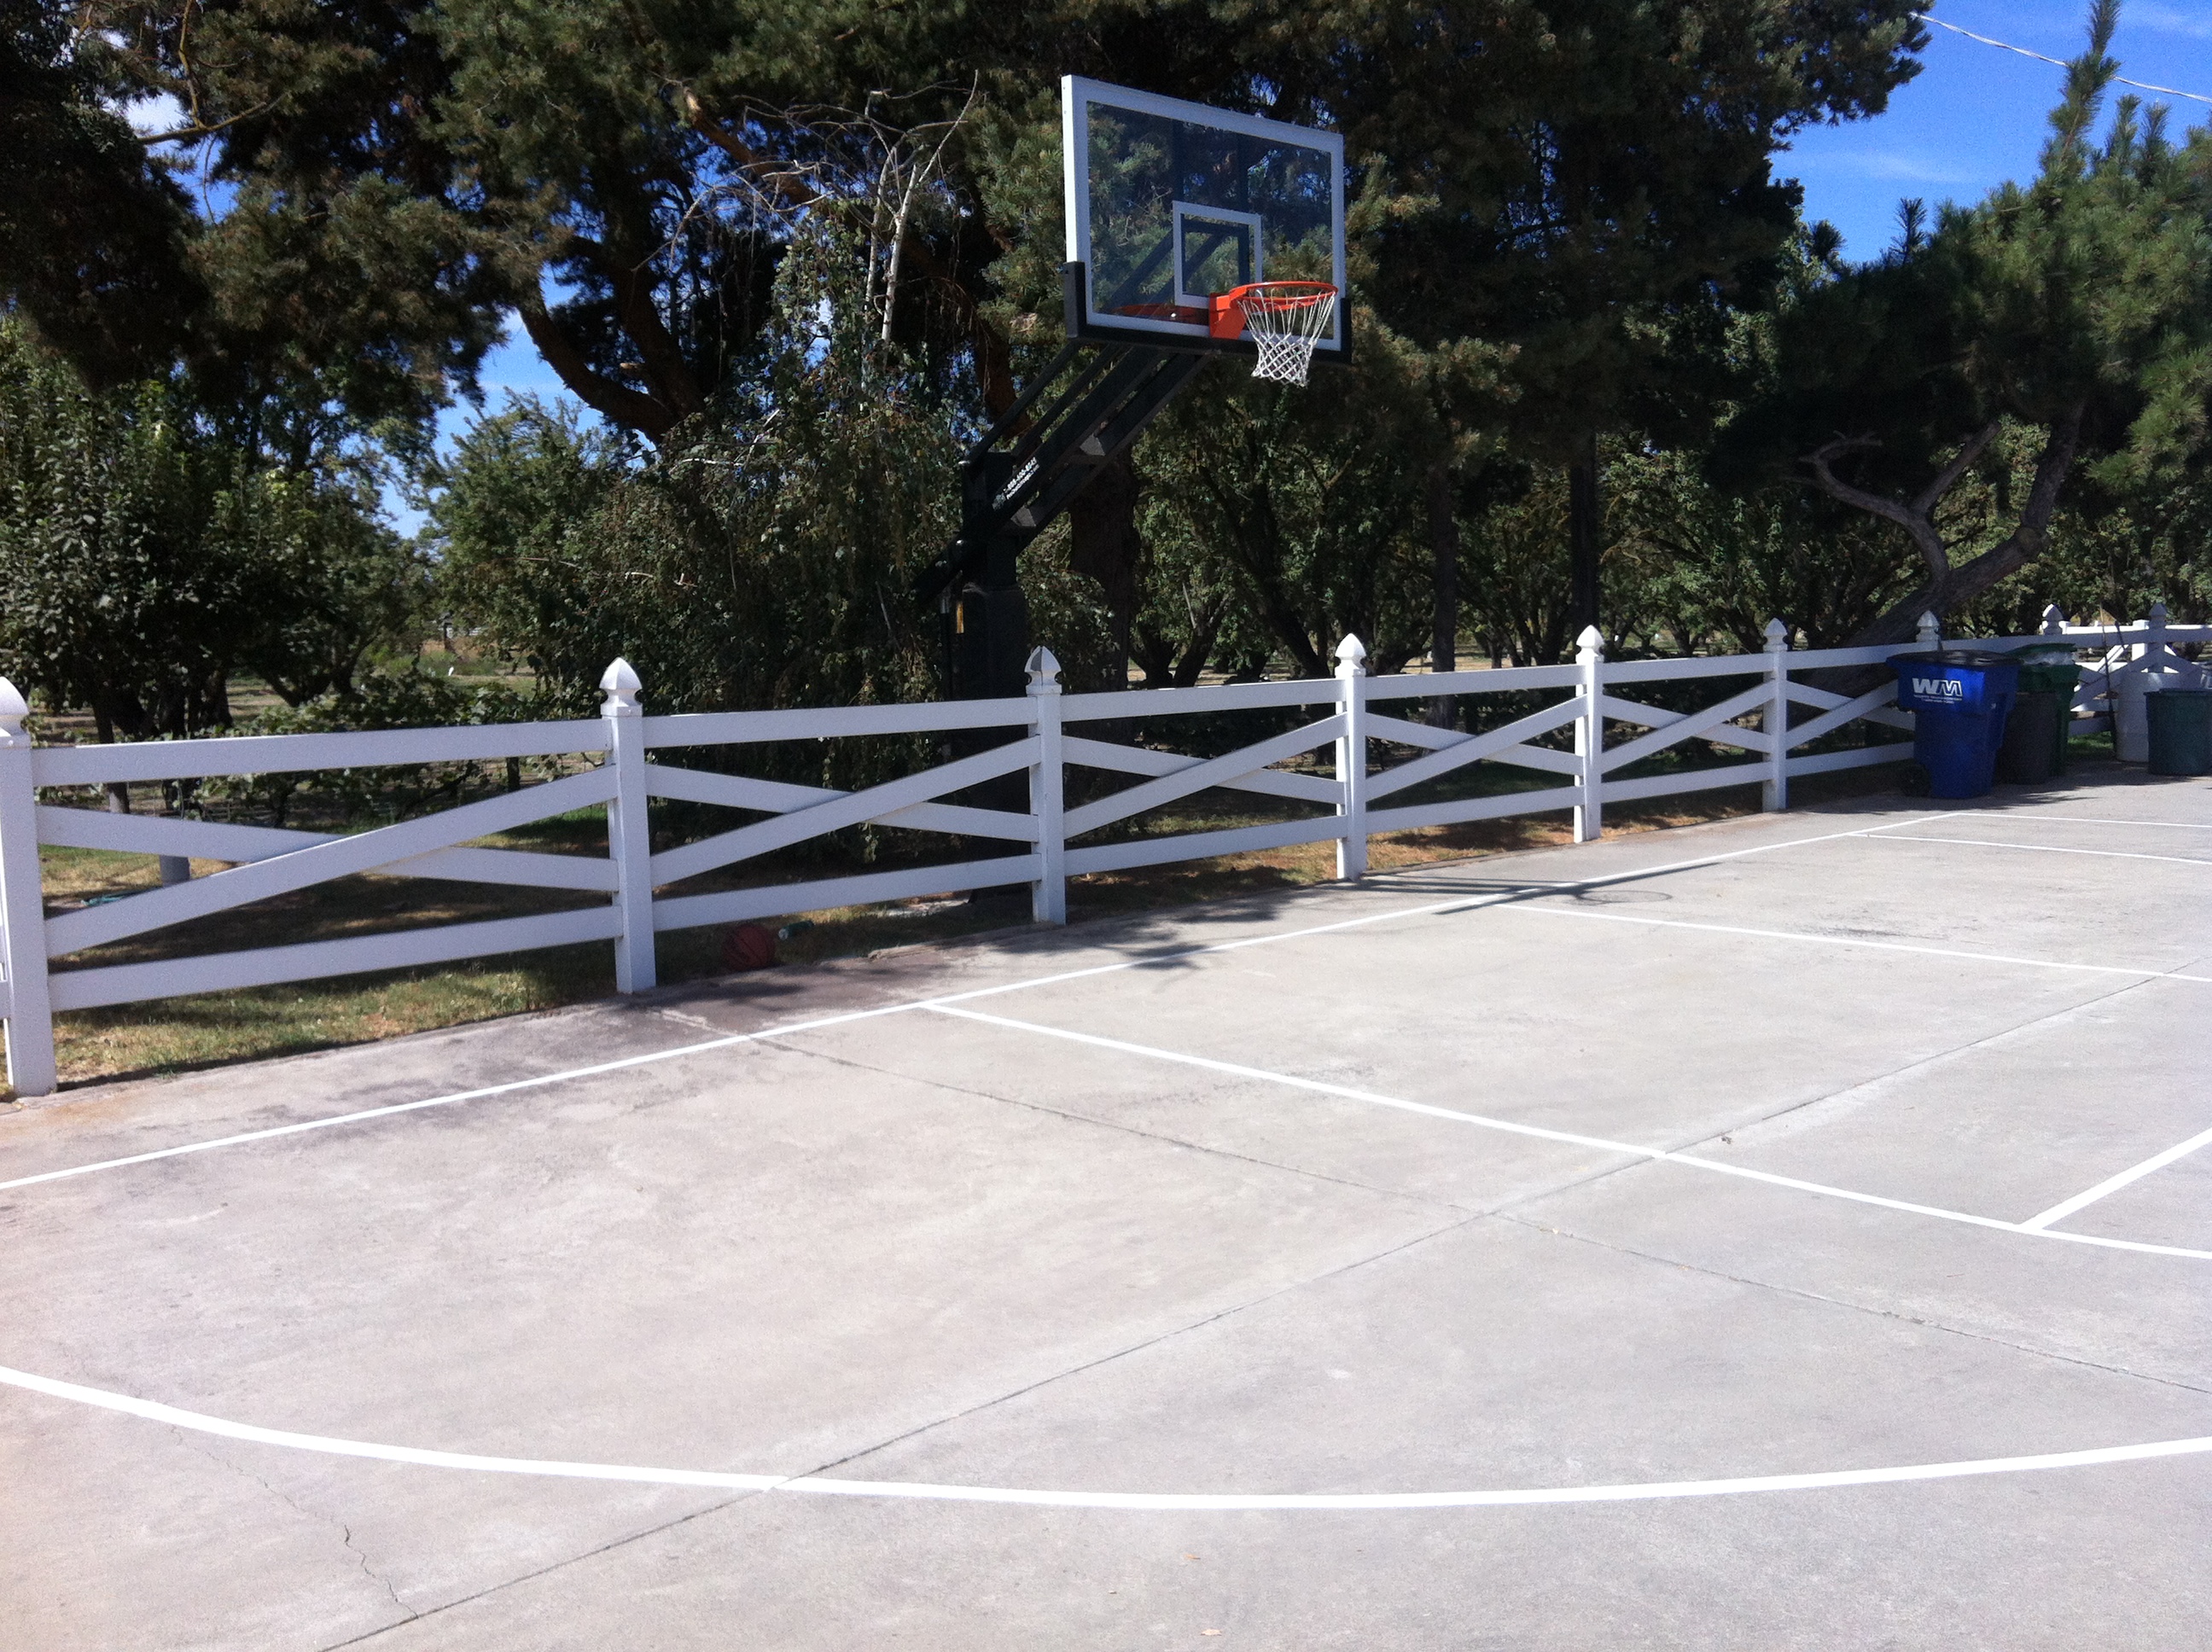 There's the hoop installed right behind the white fence.
